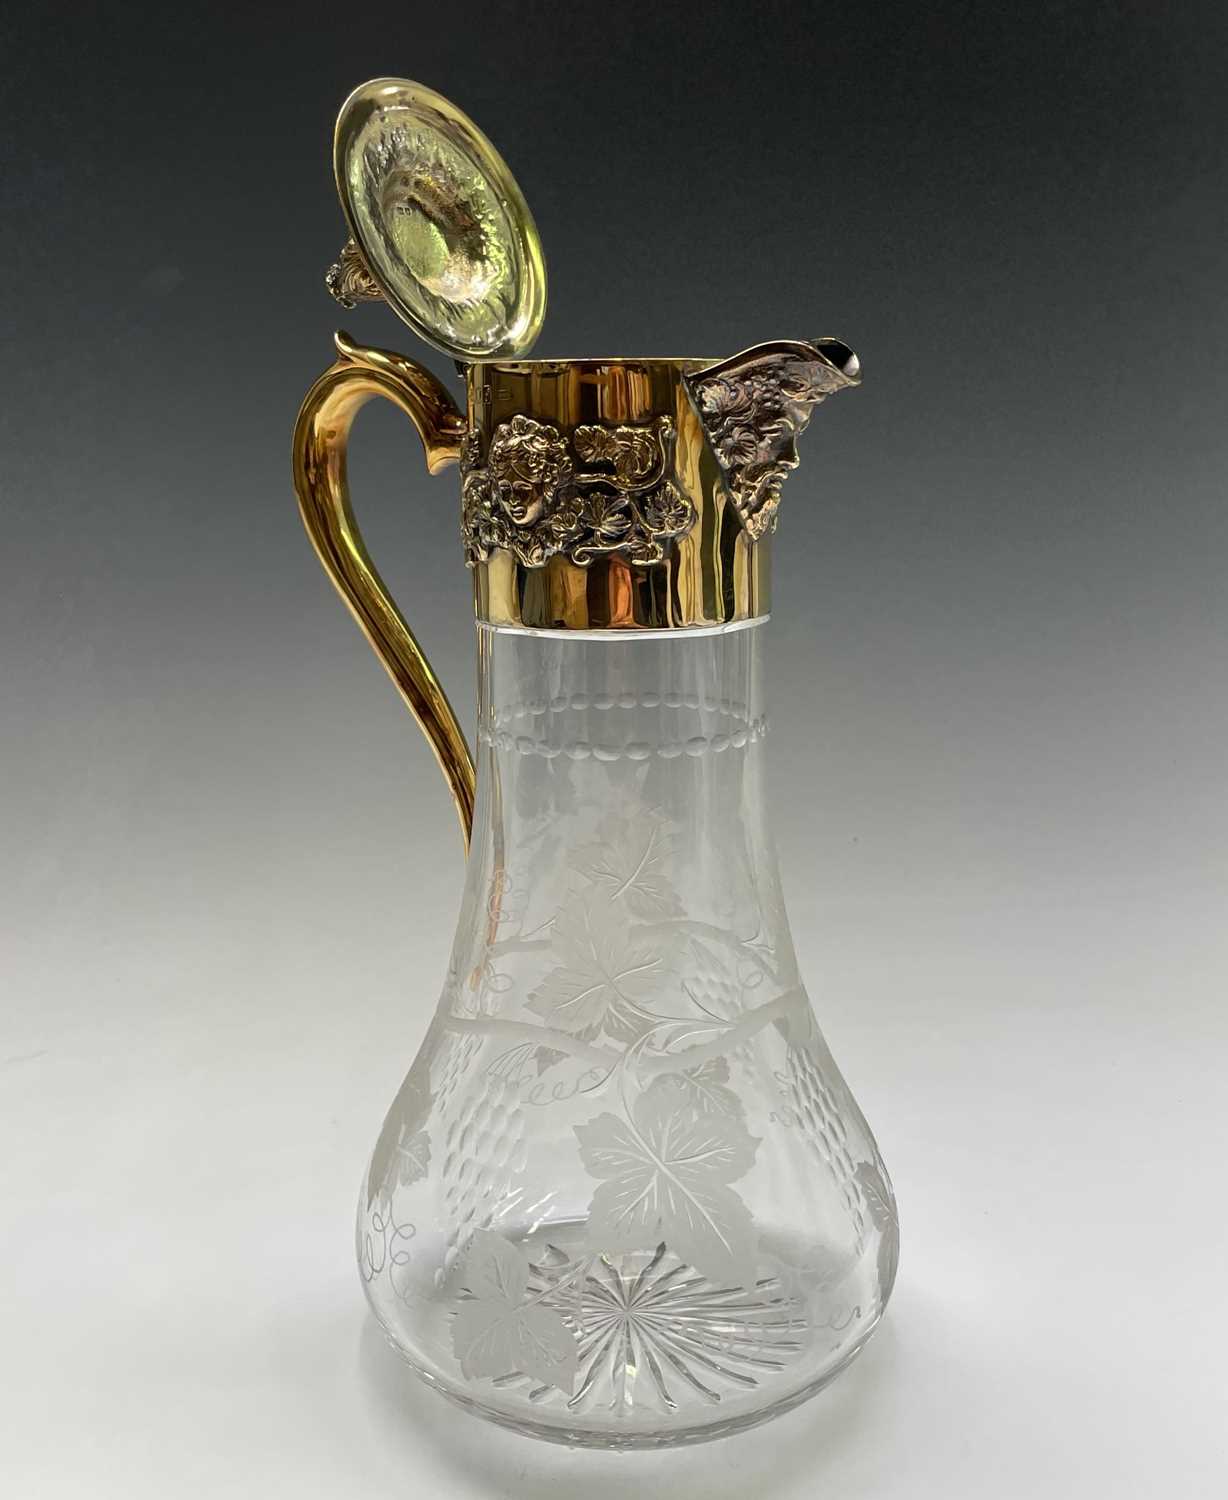 An Asprey claret jug the glass body cut and engraved with vines the silver-gilt mount with - Image 7 of 16